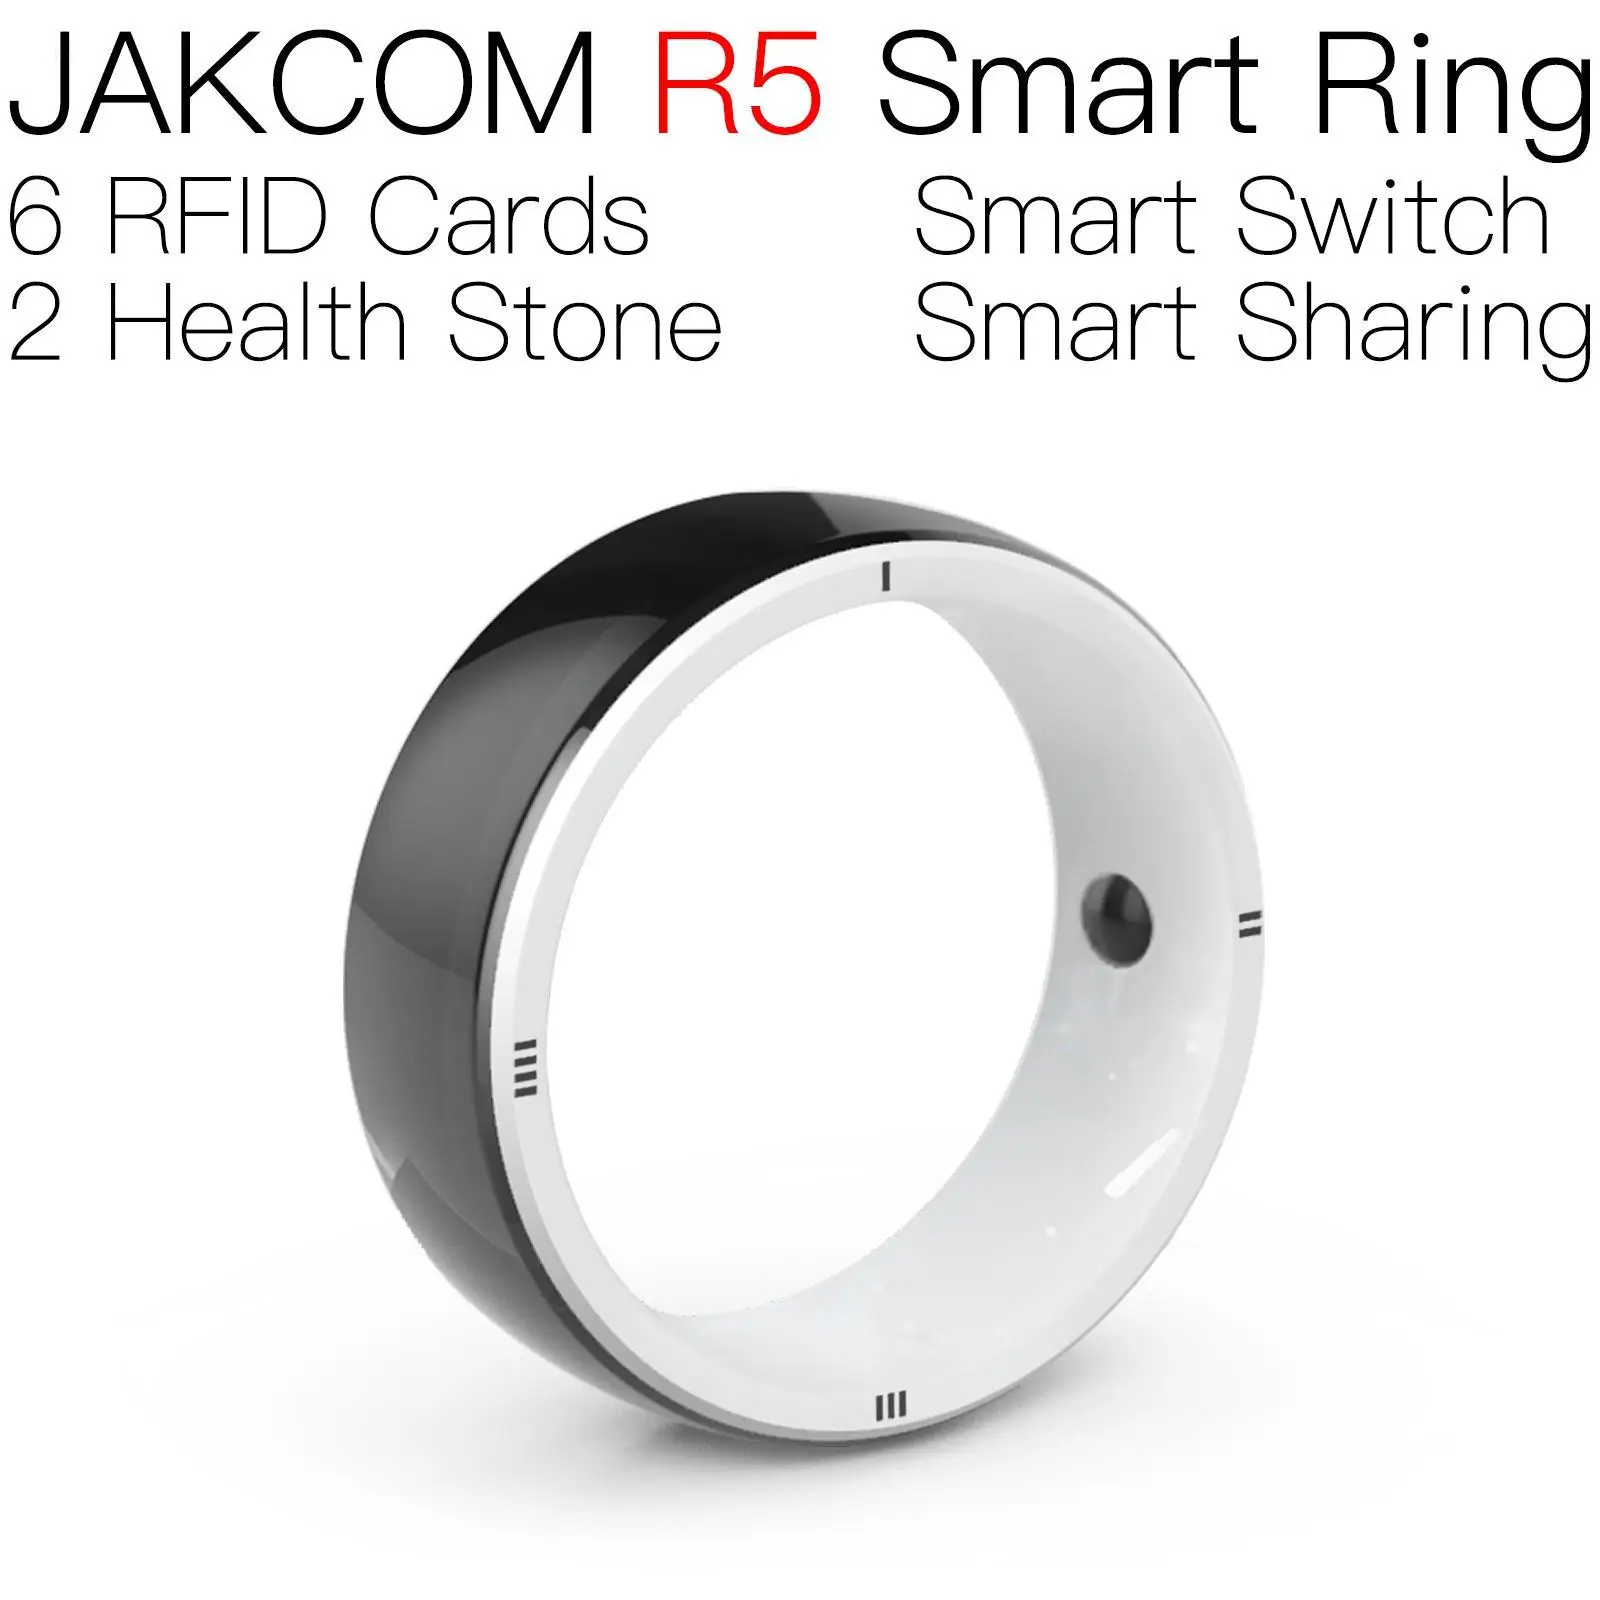 

JAKCOM R5 Smart Ring Newer than labels for washing mah jong chips classic 1k block 0 uid rewriteable mct syringes 1ml 30